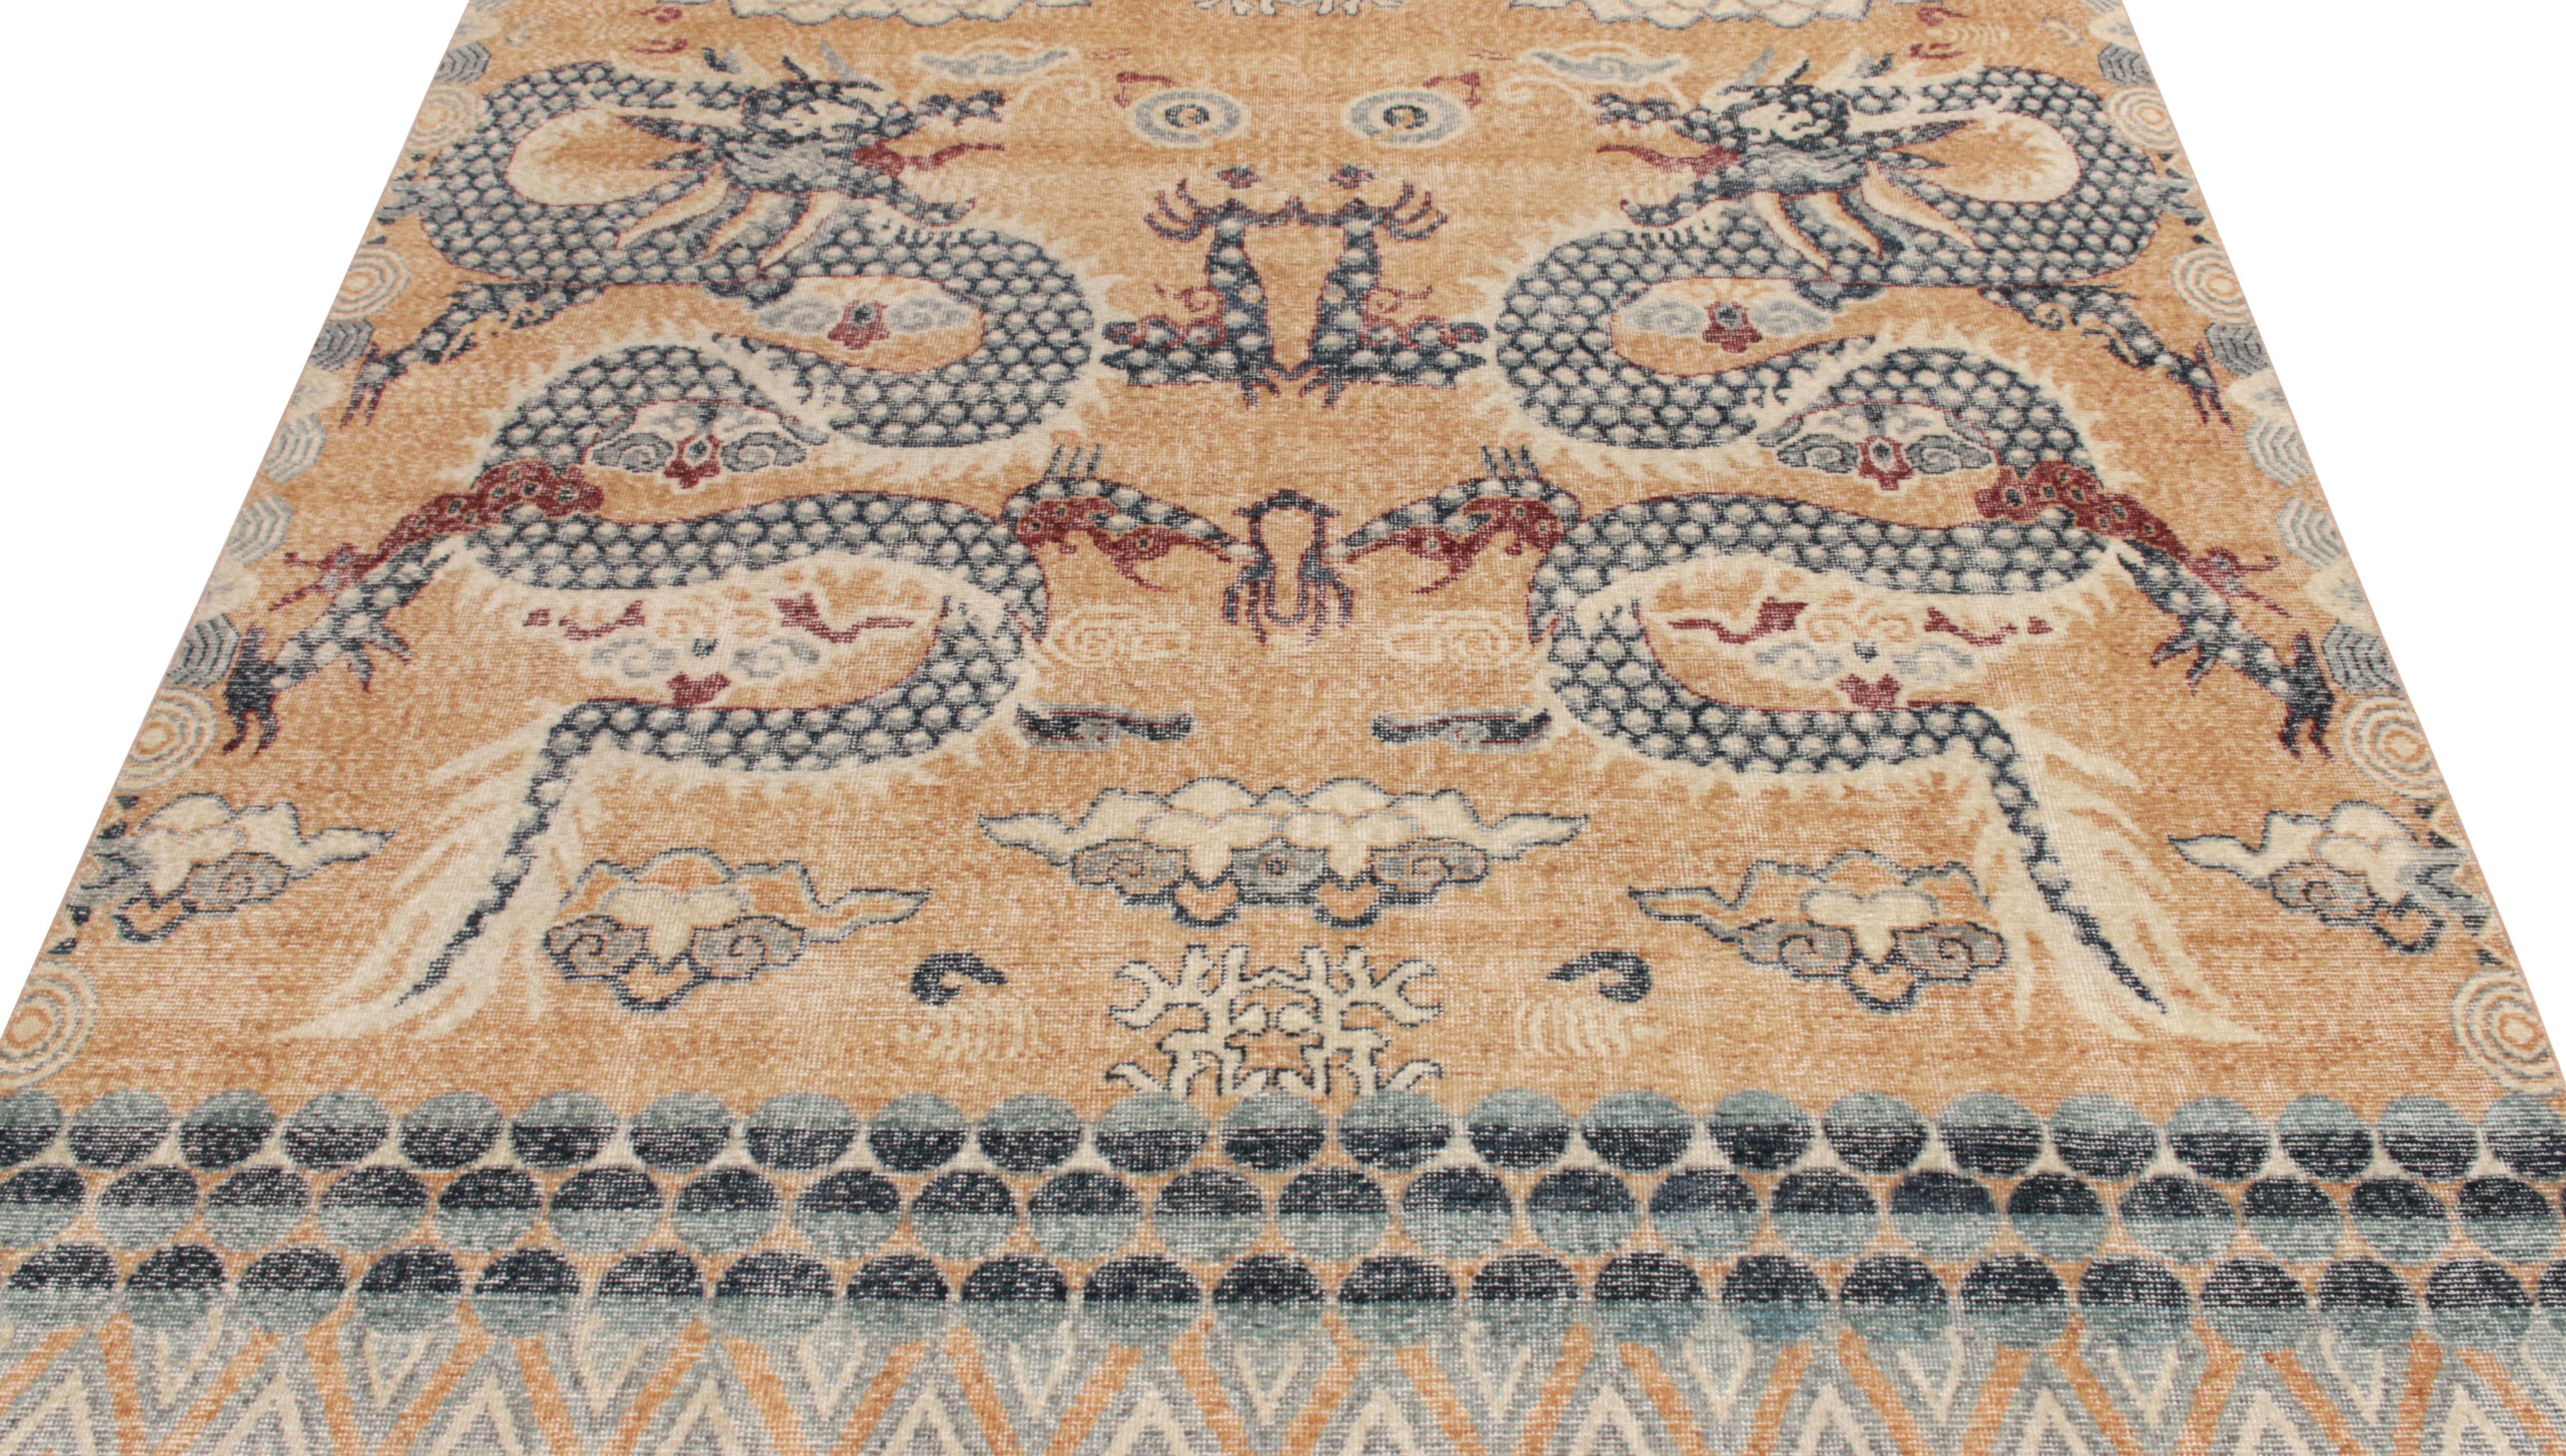 Drawing inspiration from iconic 19th century Chinese & Tibetan dragon rugs, we present an 8x10 vision from our Homage Collection embracing dragon imagery with cloudband motifs honoring rich historical significance. This particular nod to the folk